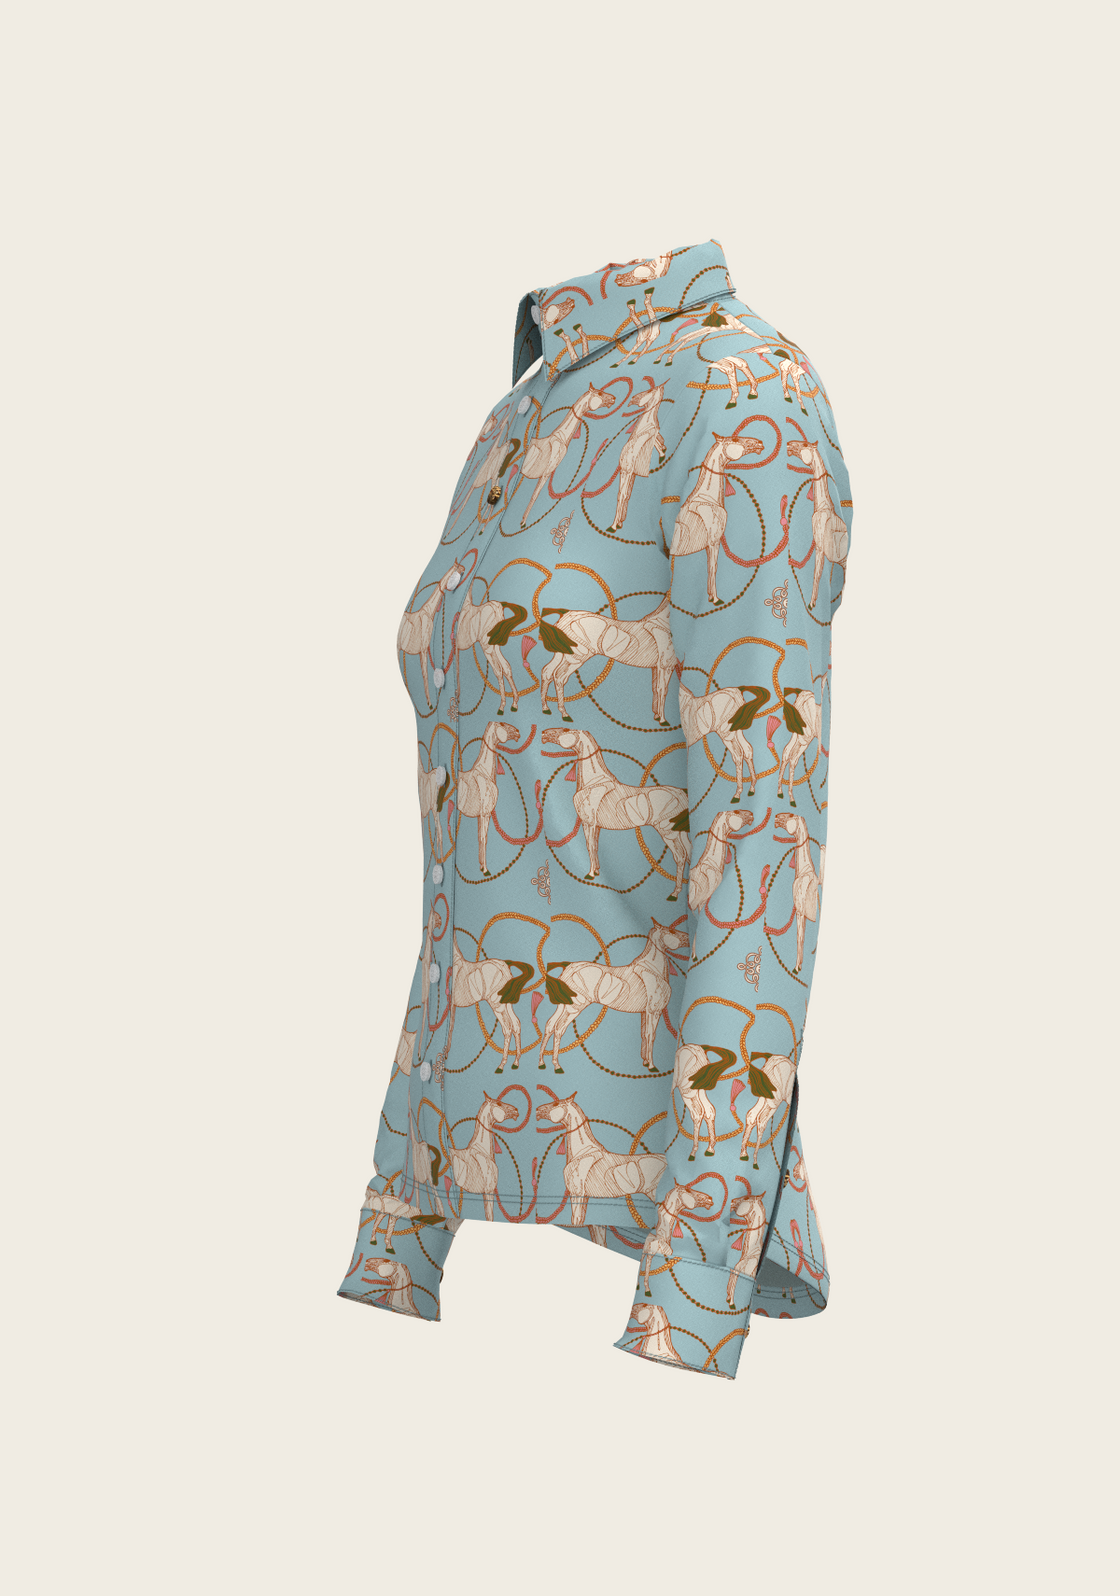 Roped Horses on Sky Blue Ladies Button Shirt